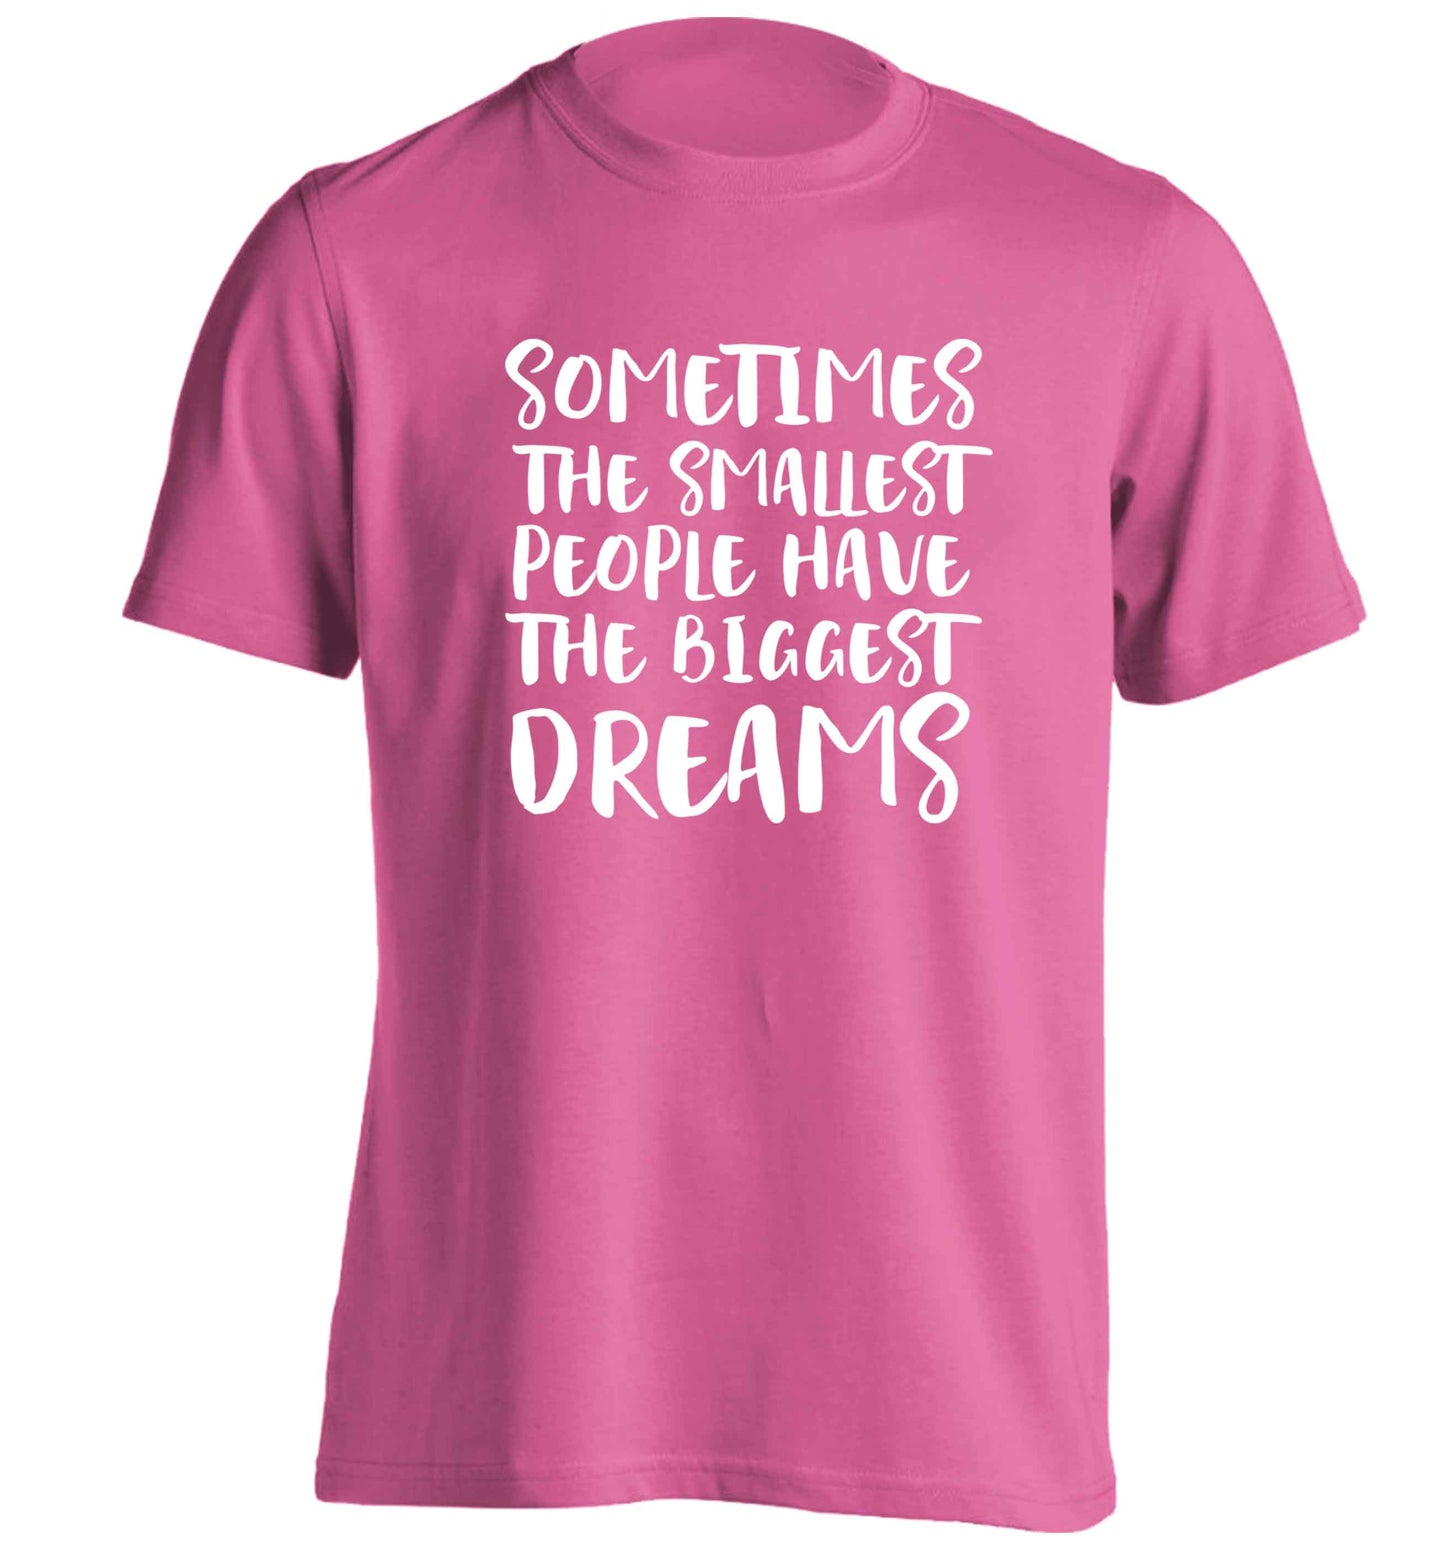 Sometimes the smallest people have the biggest dreams adults unisex pink Tshirt 2XL